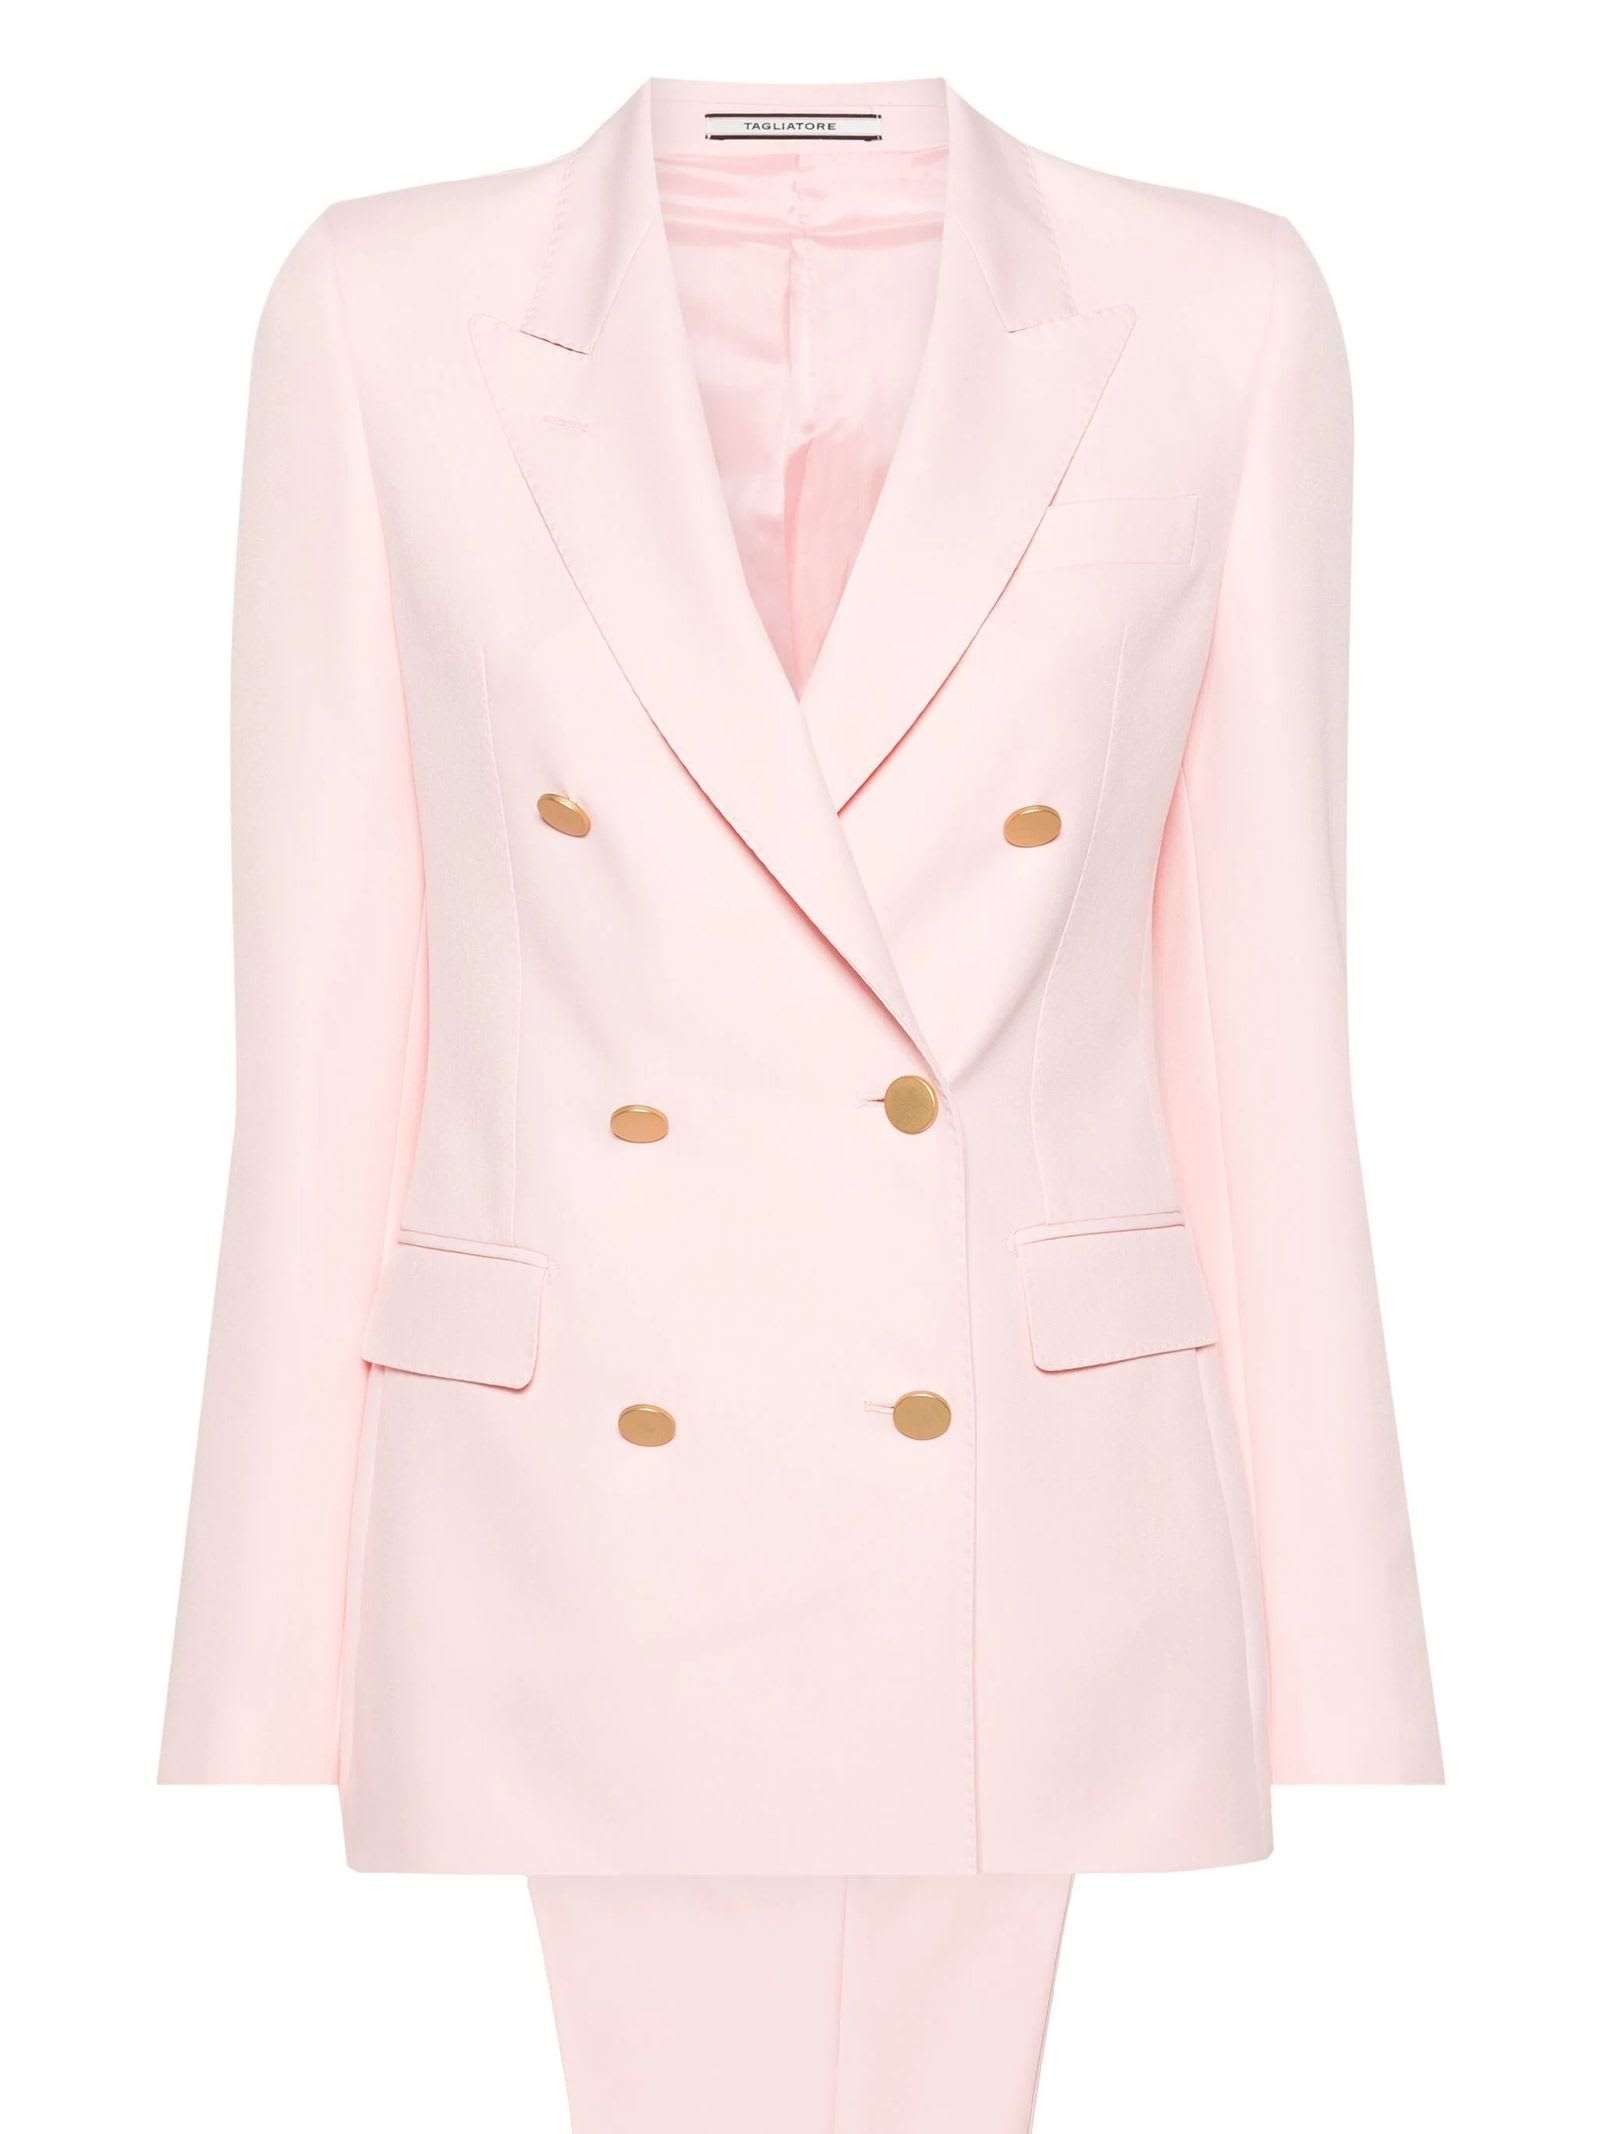 Shop Tagliatore Pink Double-breasted Suit